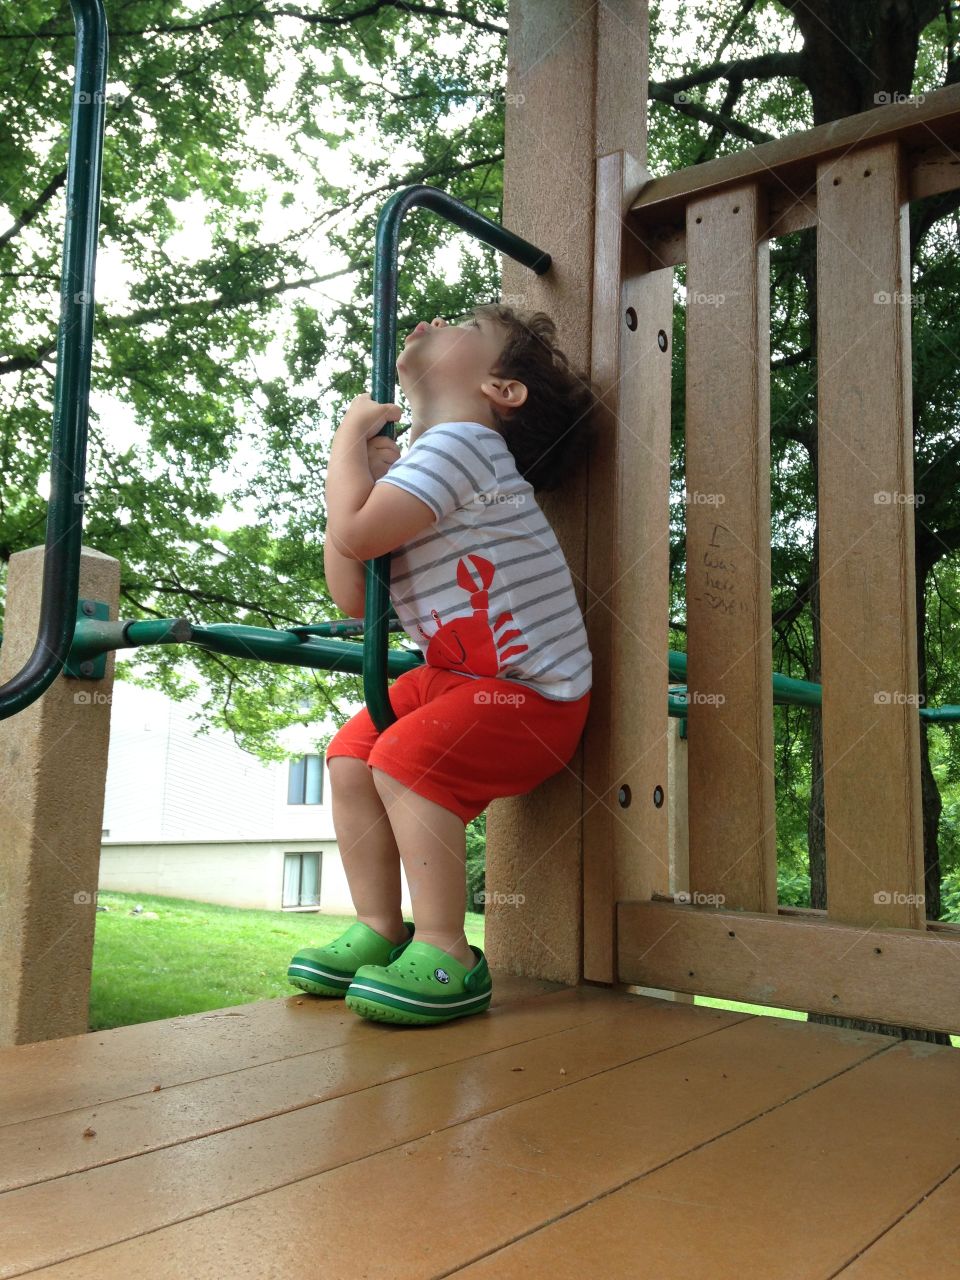 Toddler boy at the playground in summer.